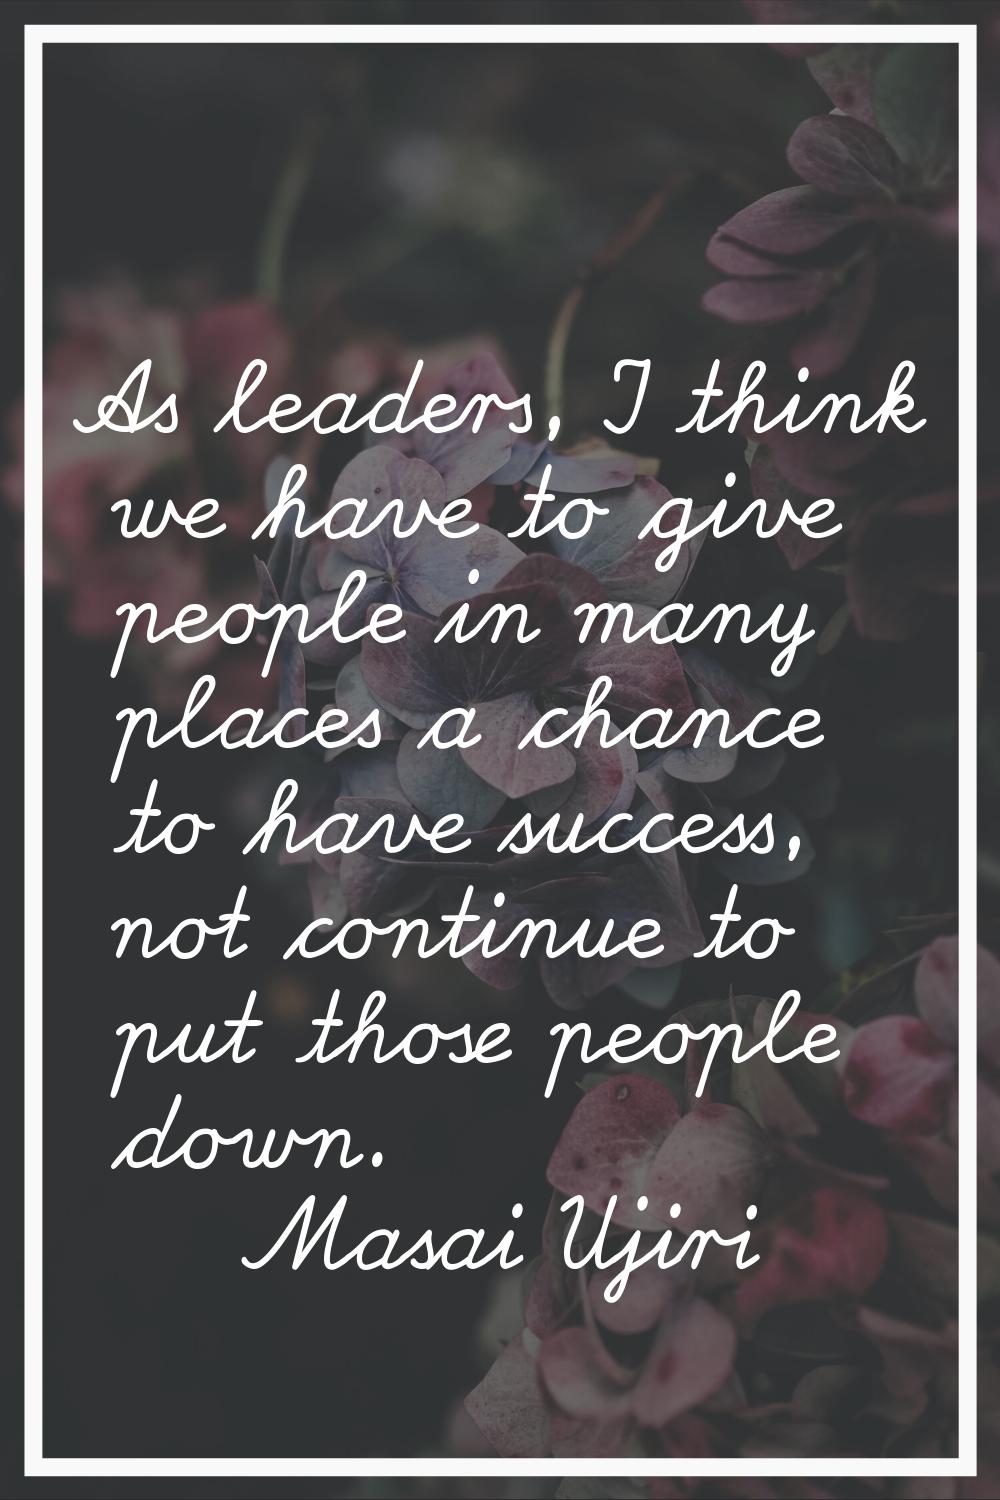 As leaders, I think we have to give people in many places a chance to have success, not continue to